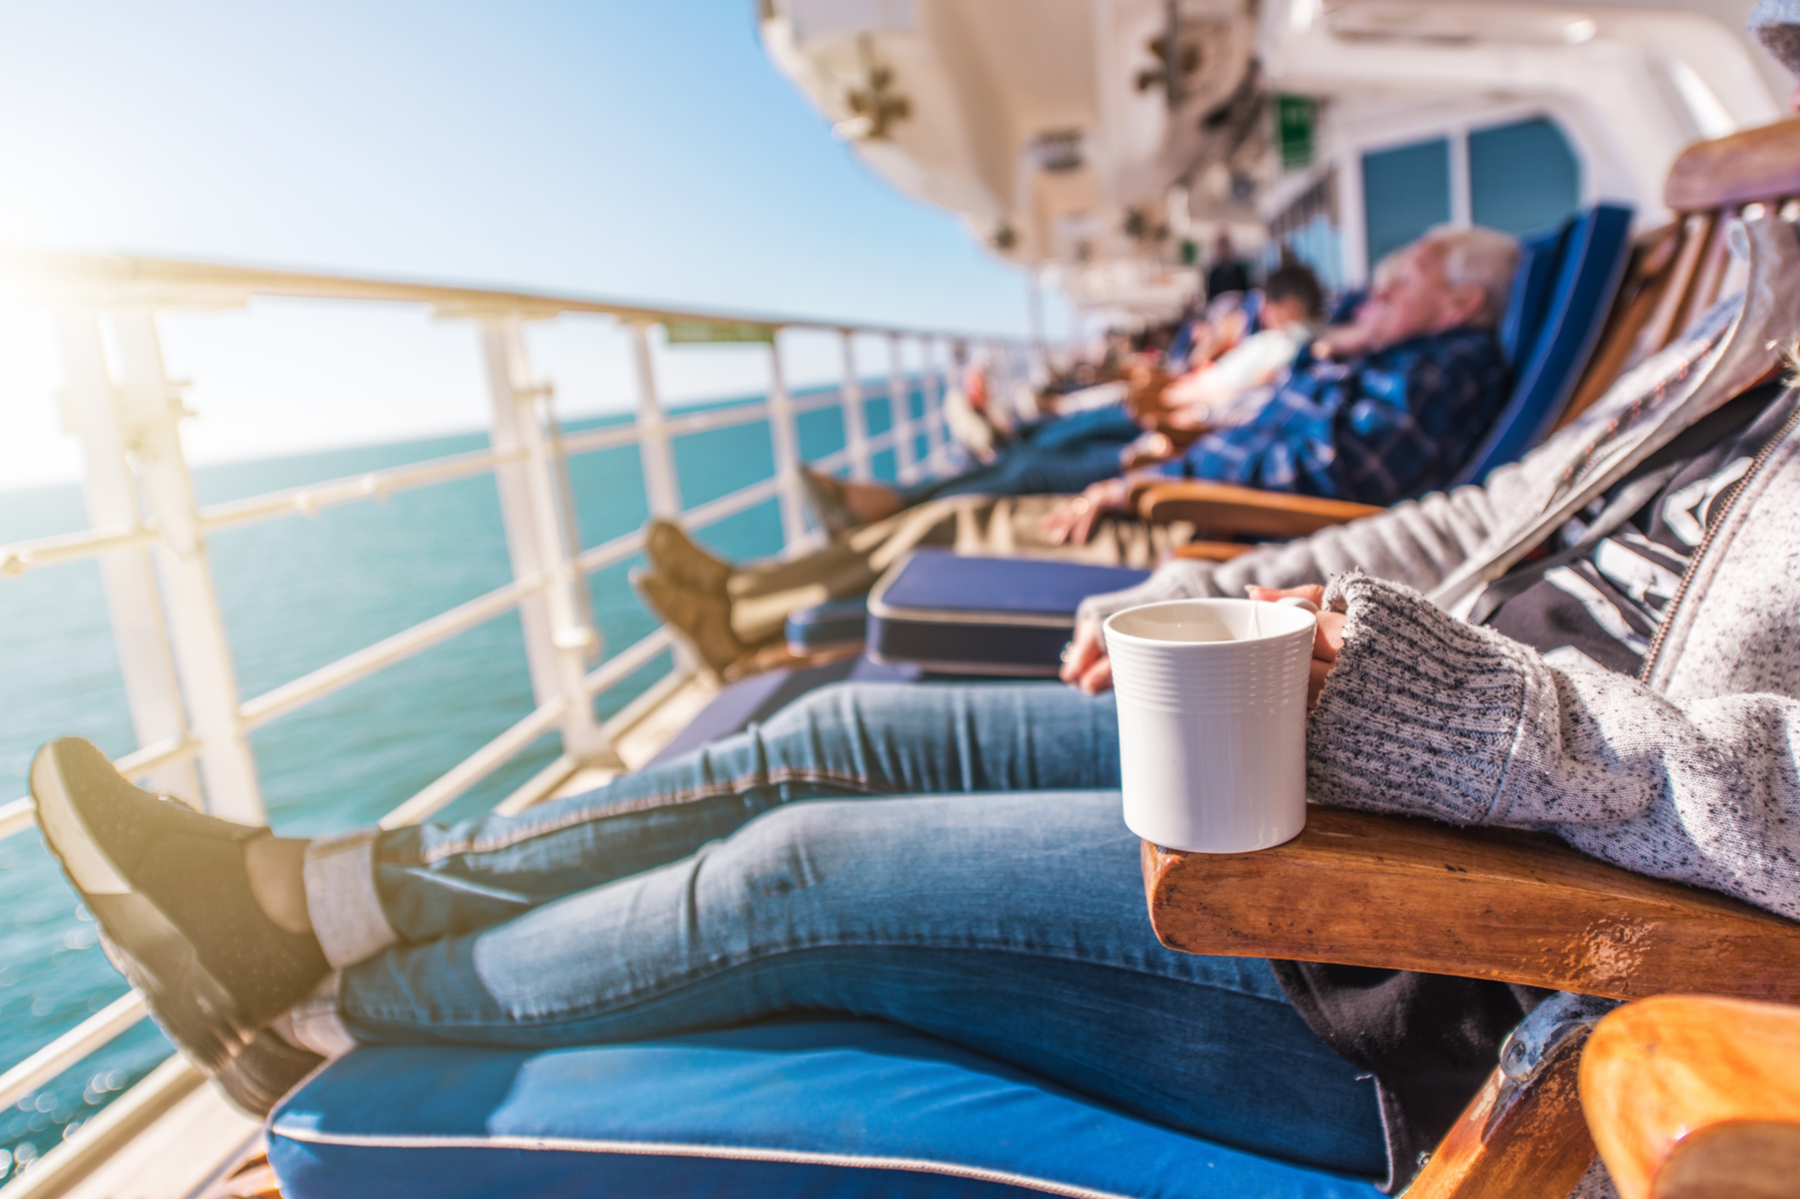 People relax in deck chairs on a cruise